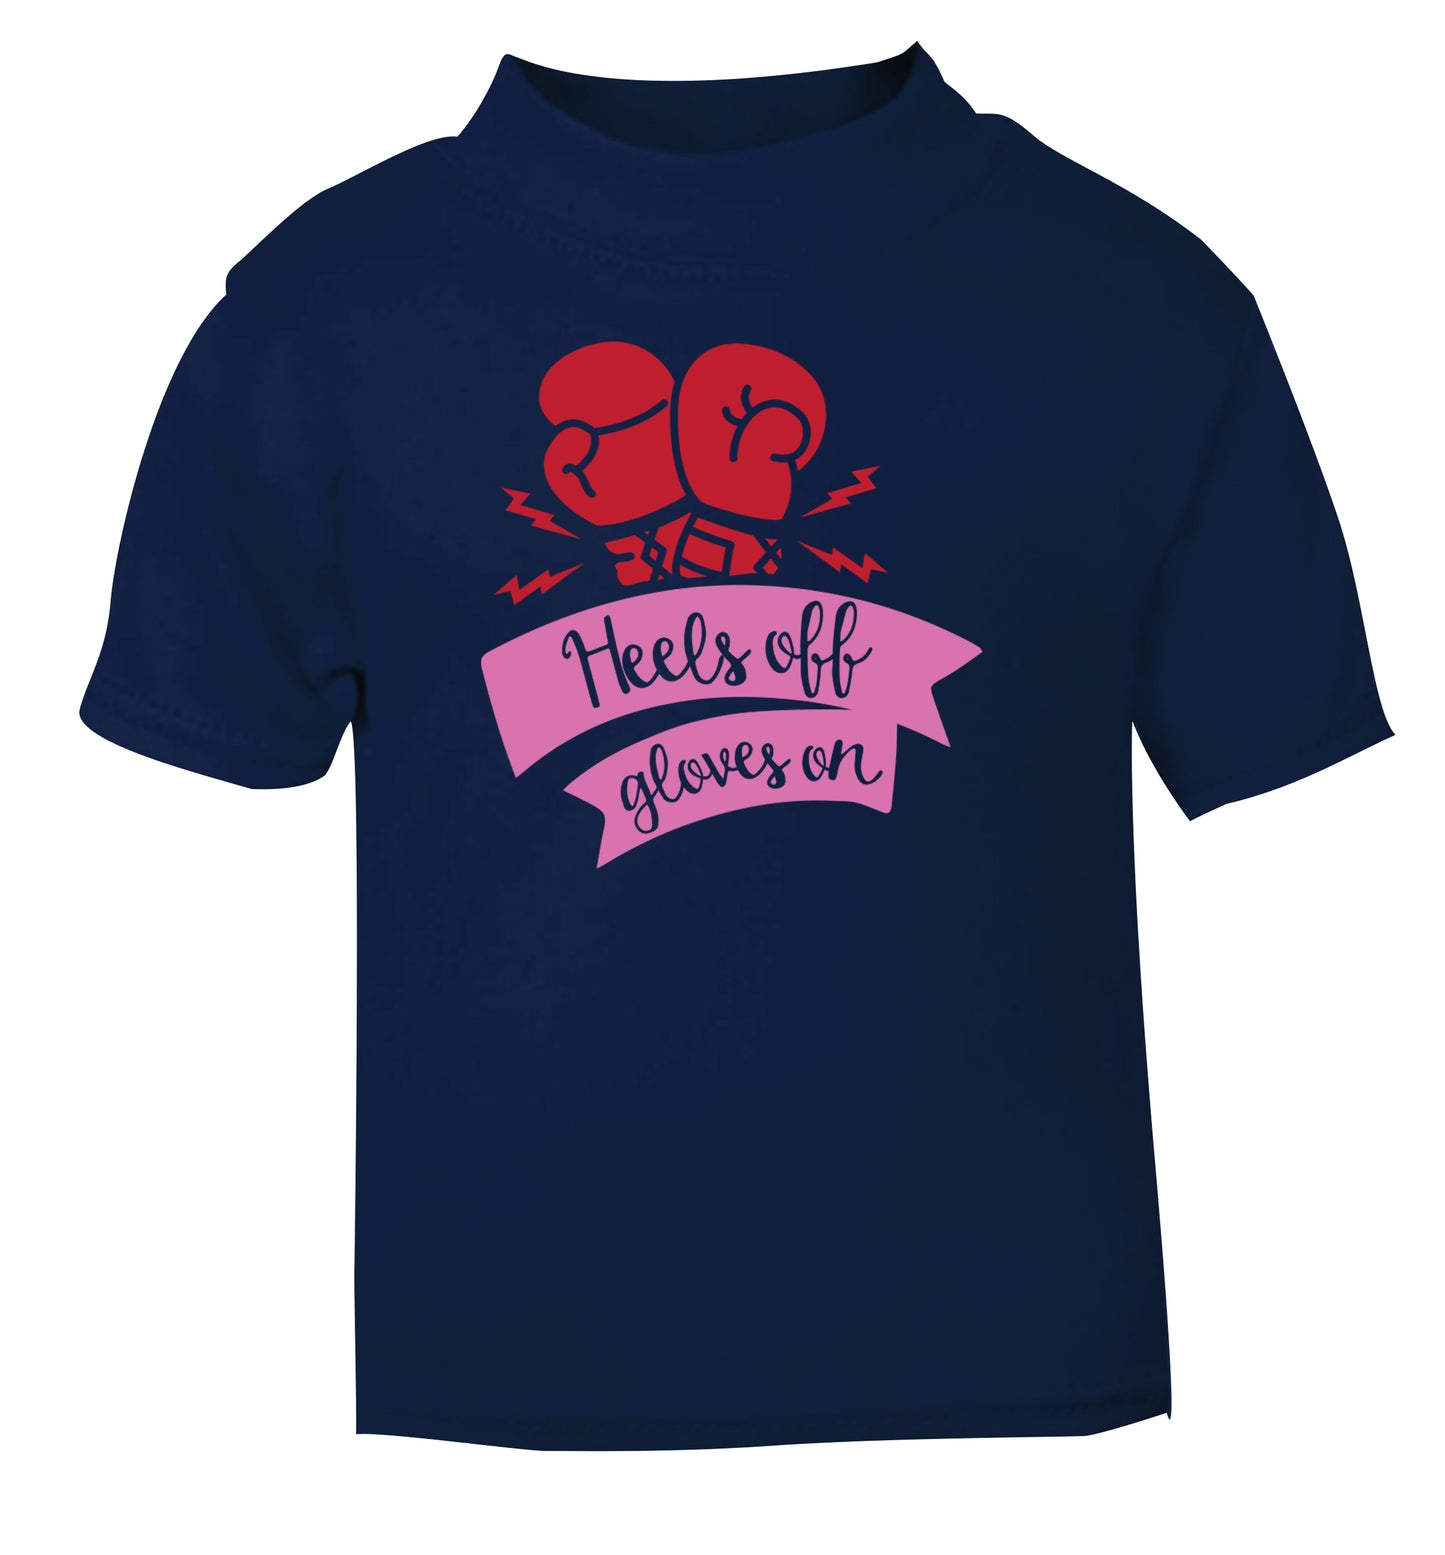 Heels off gloves on navy Baby Toddler Tshirt 2 Years